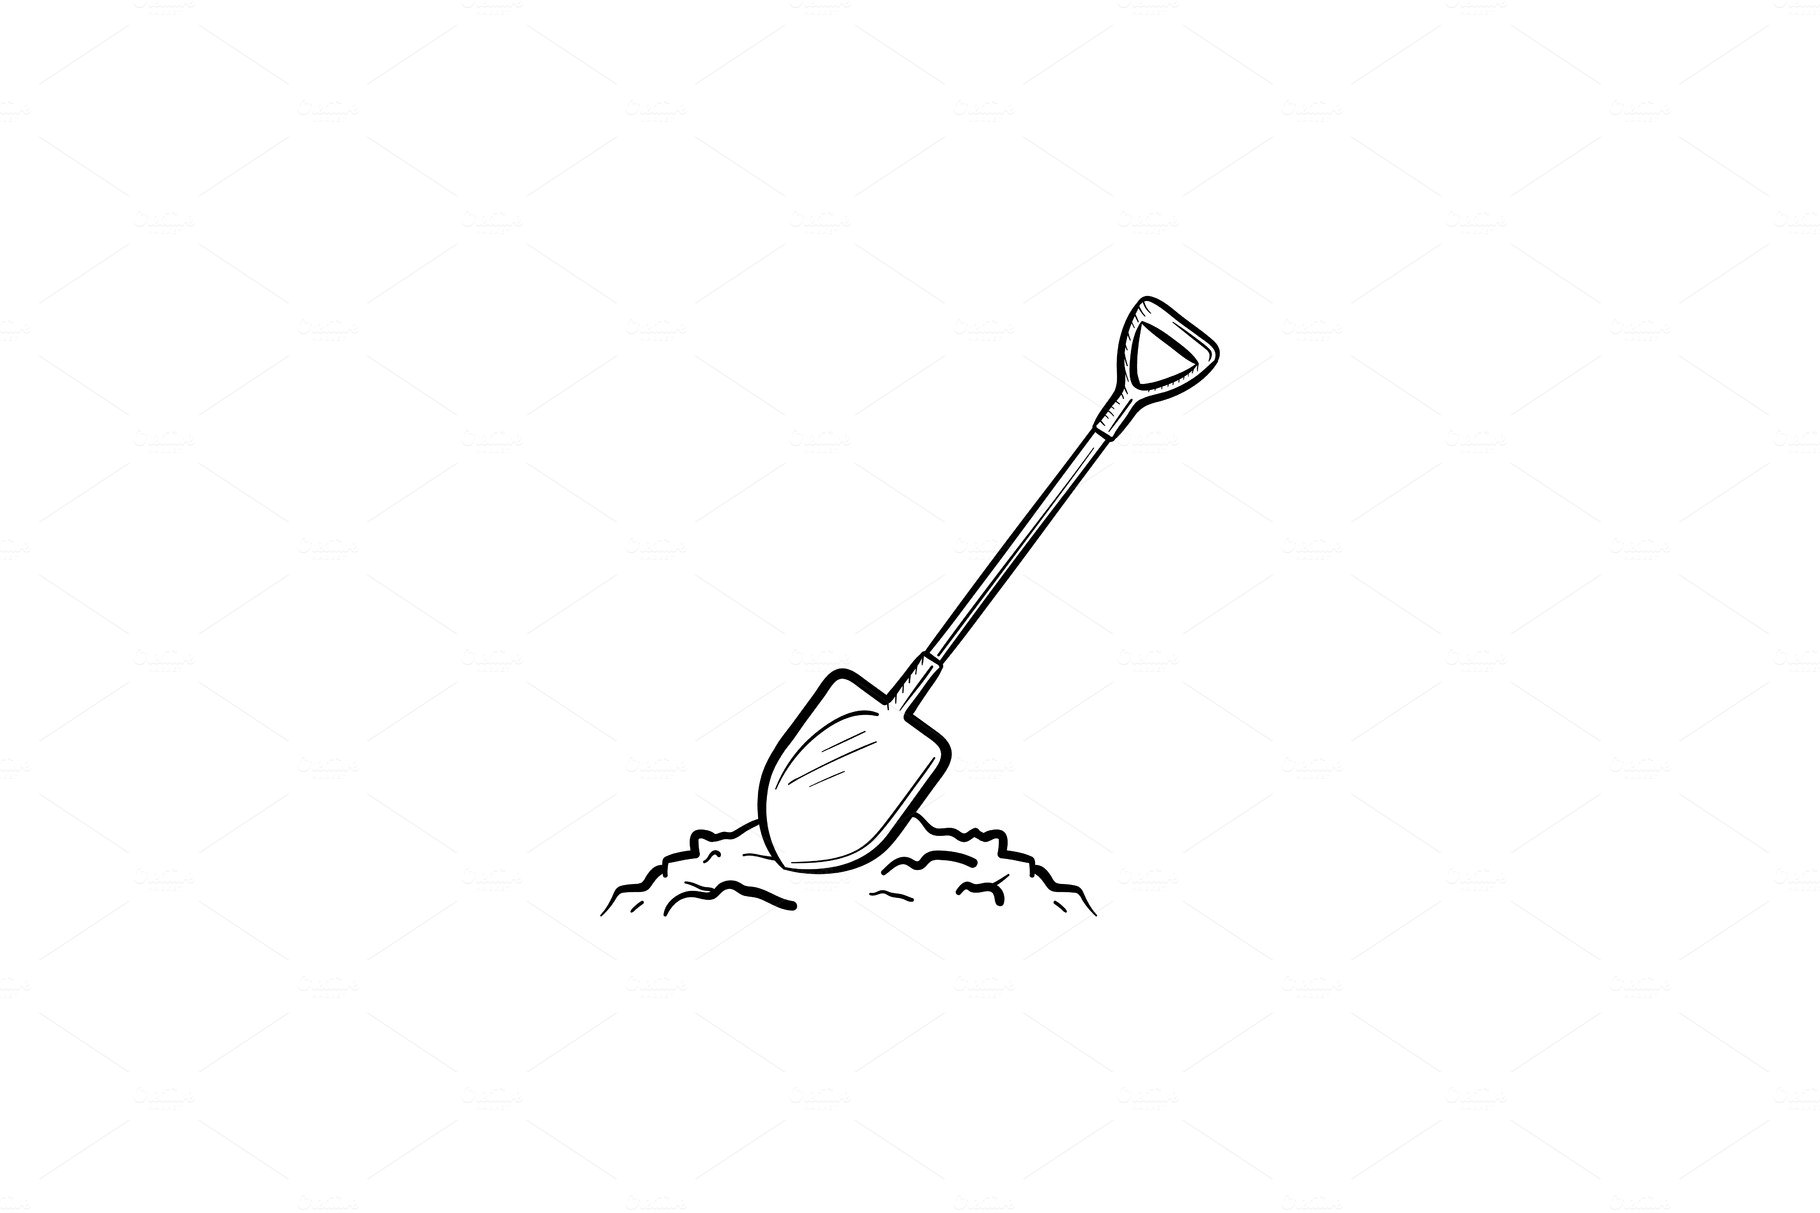 Mining shovel in rock hand drawn outline doodle icon cover image.